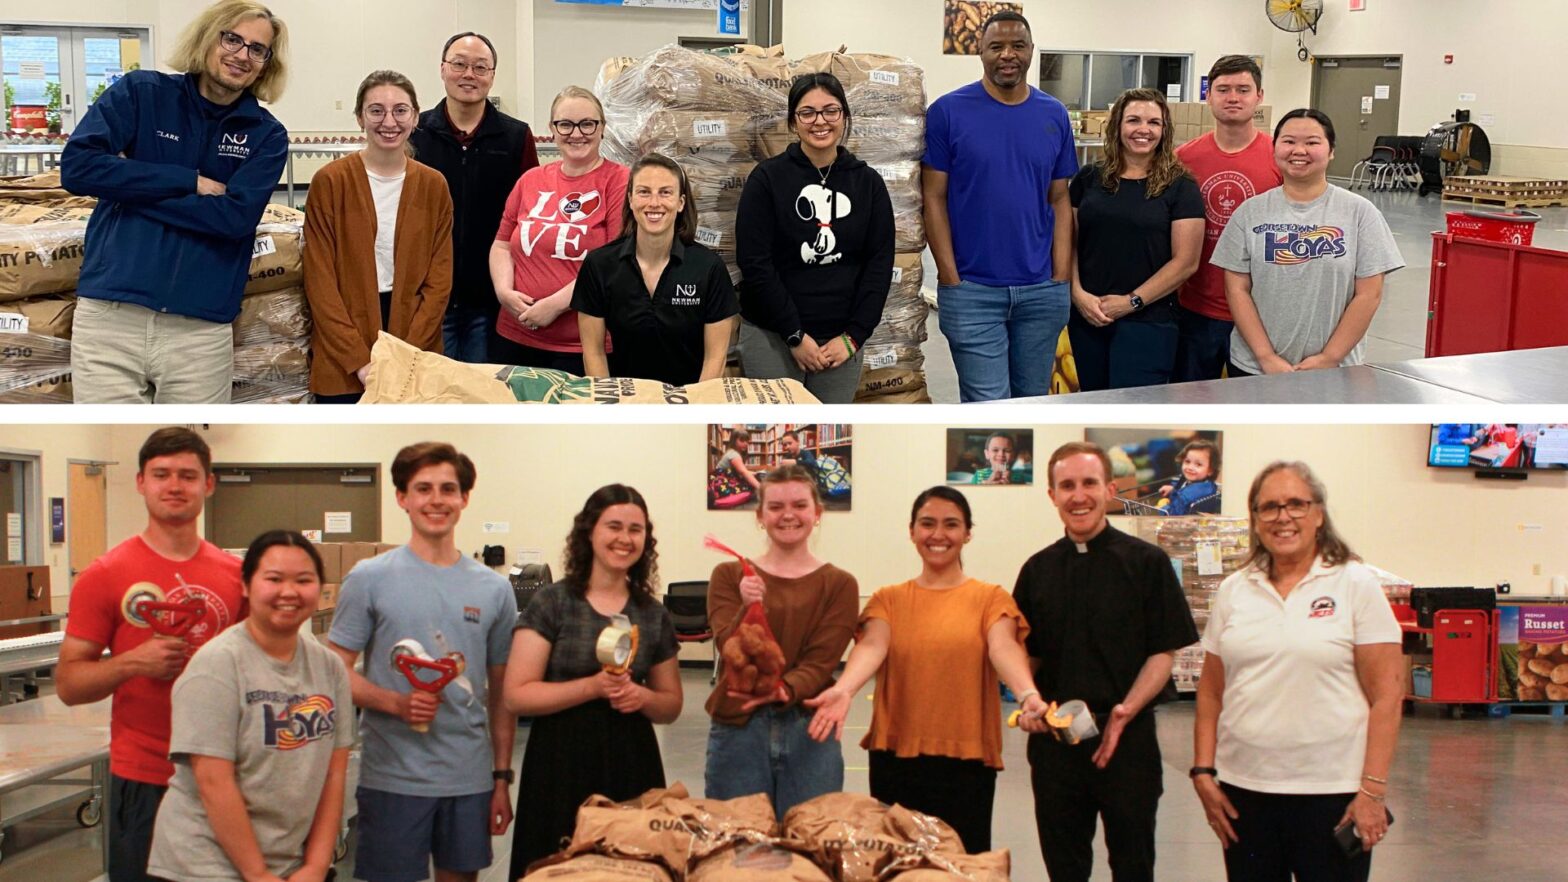 Several Newman University community members participated in the Kansas Food Bank service day April 17.